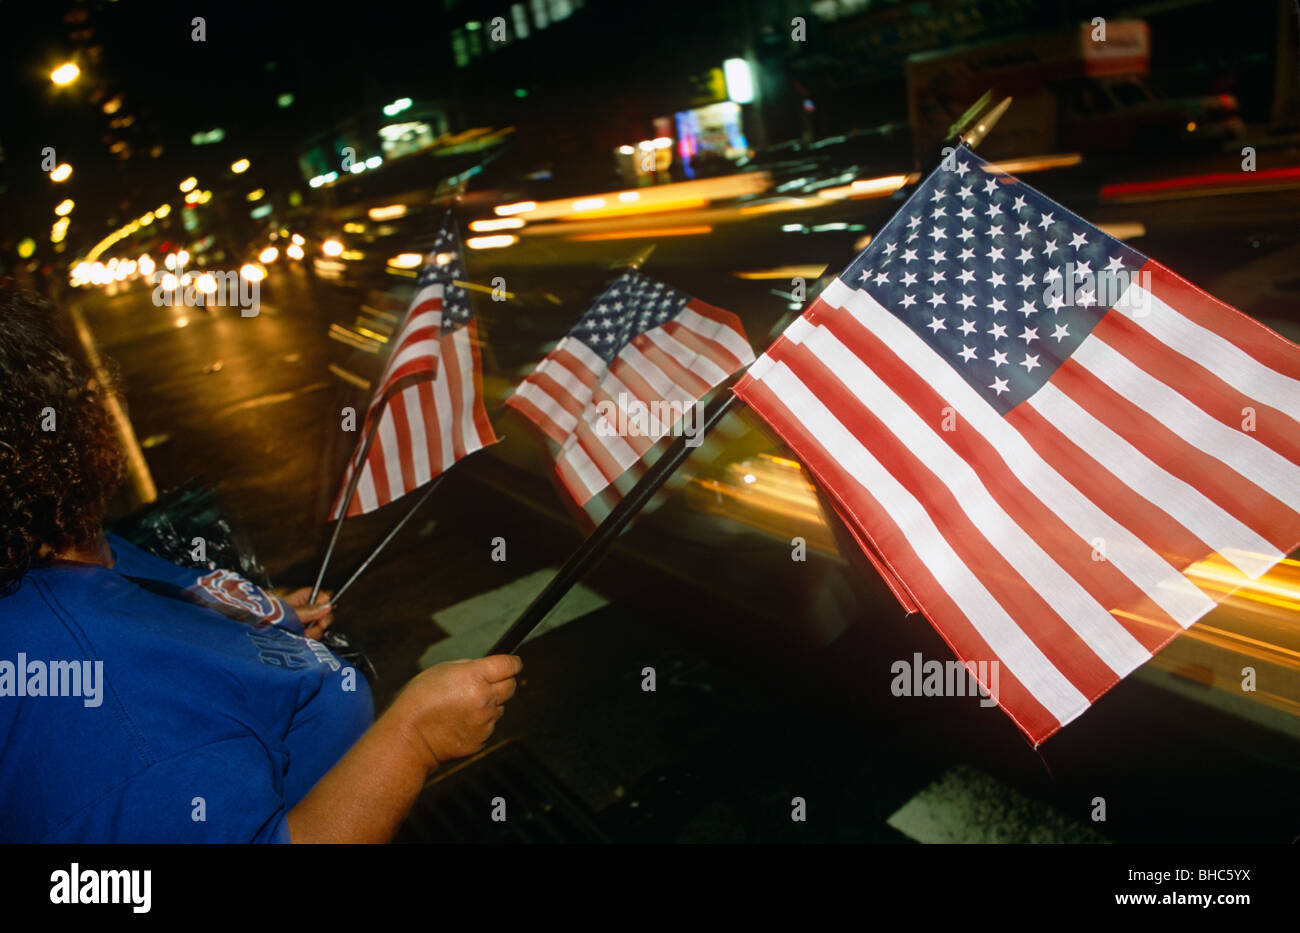 American flags re on sale at night in the streets of Manhattan, only days after the attacks on New York’s twin towers Stock Photo